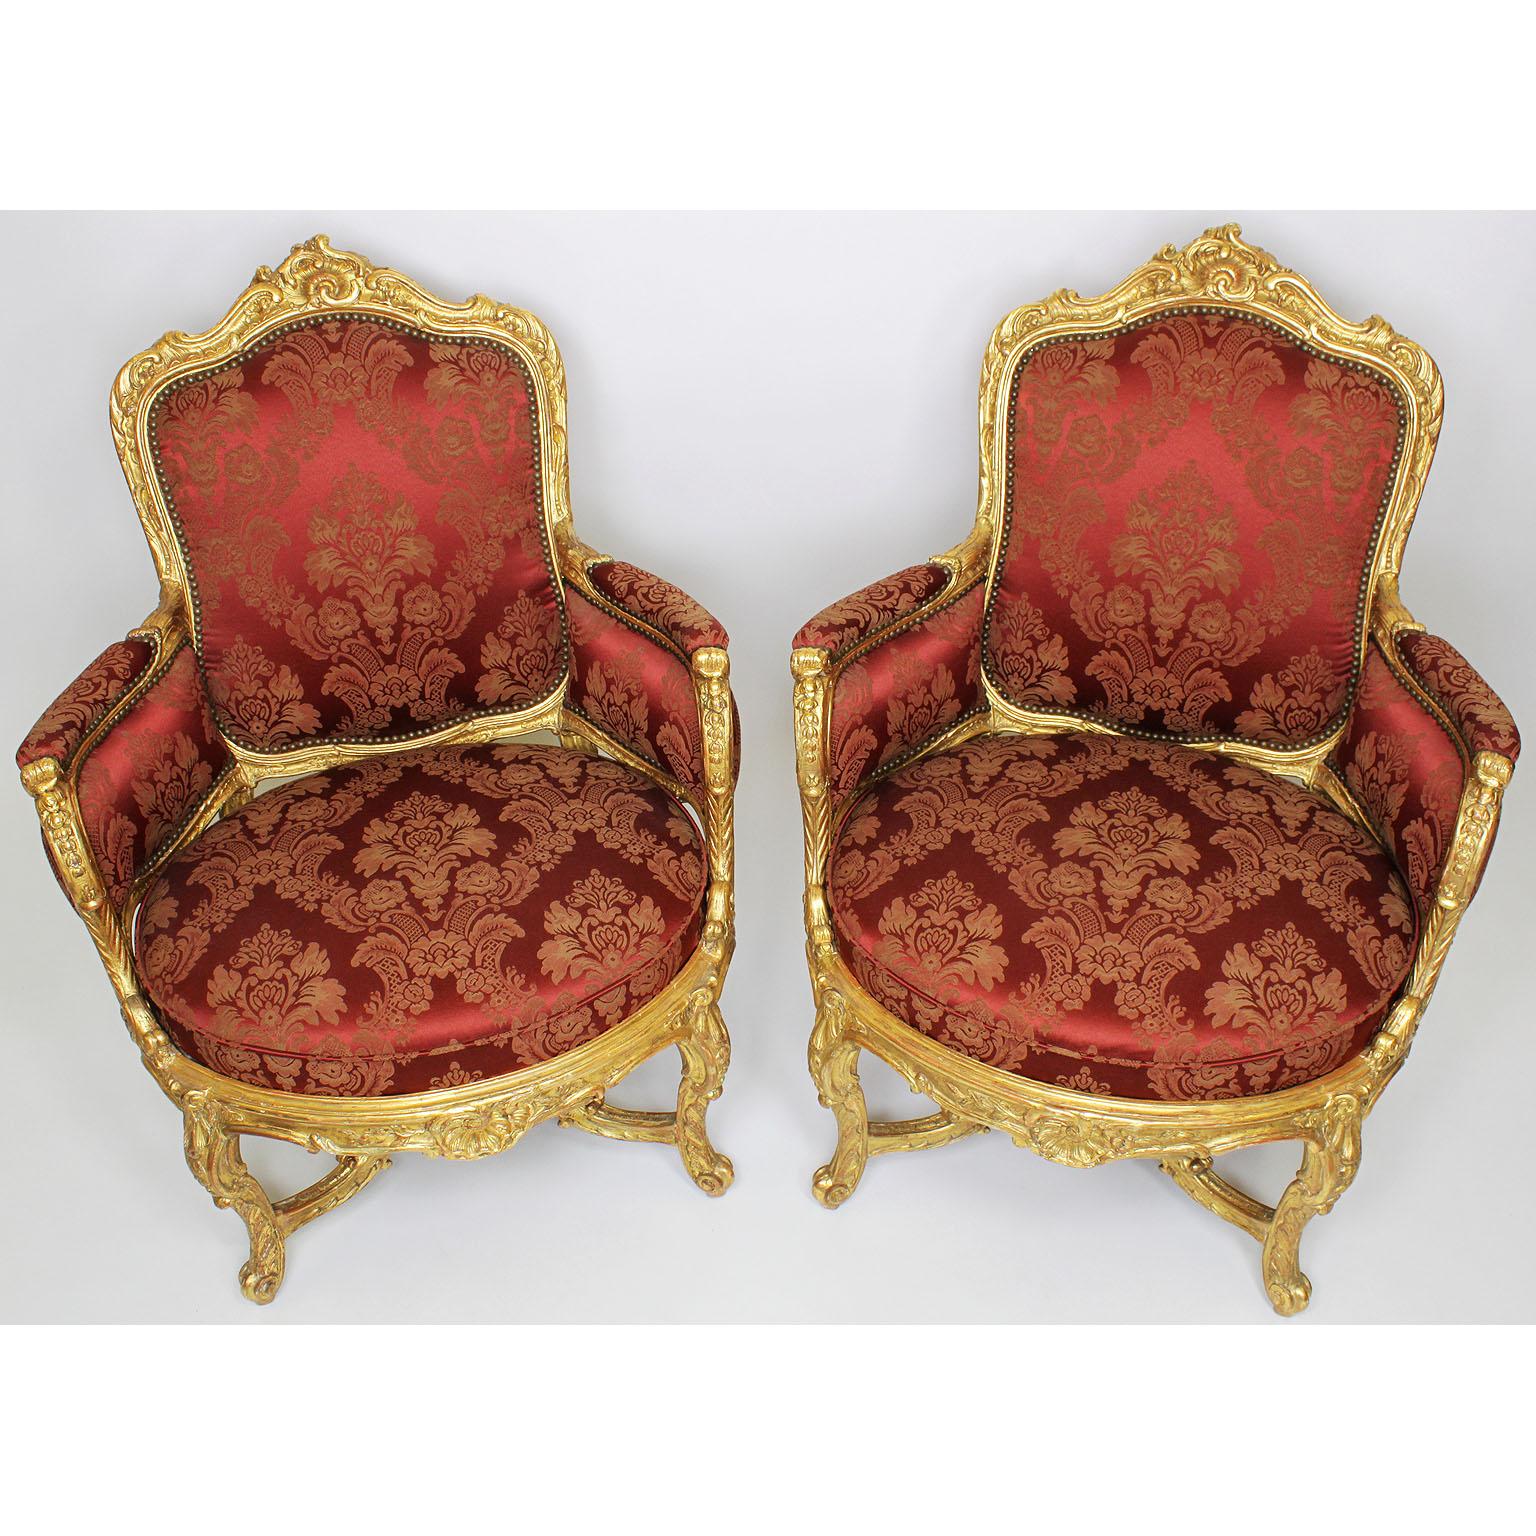 A very Fine pair of french 19th century Louis XV style giltwood carved marquises bergère armchairs. The ornately carved gilded frames with floral and acanthus motifs with rounded edges, padded upholstered sides and armrests, on four cabriolet legs